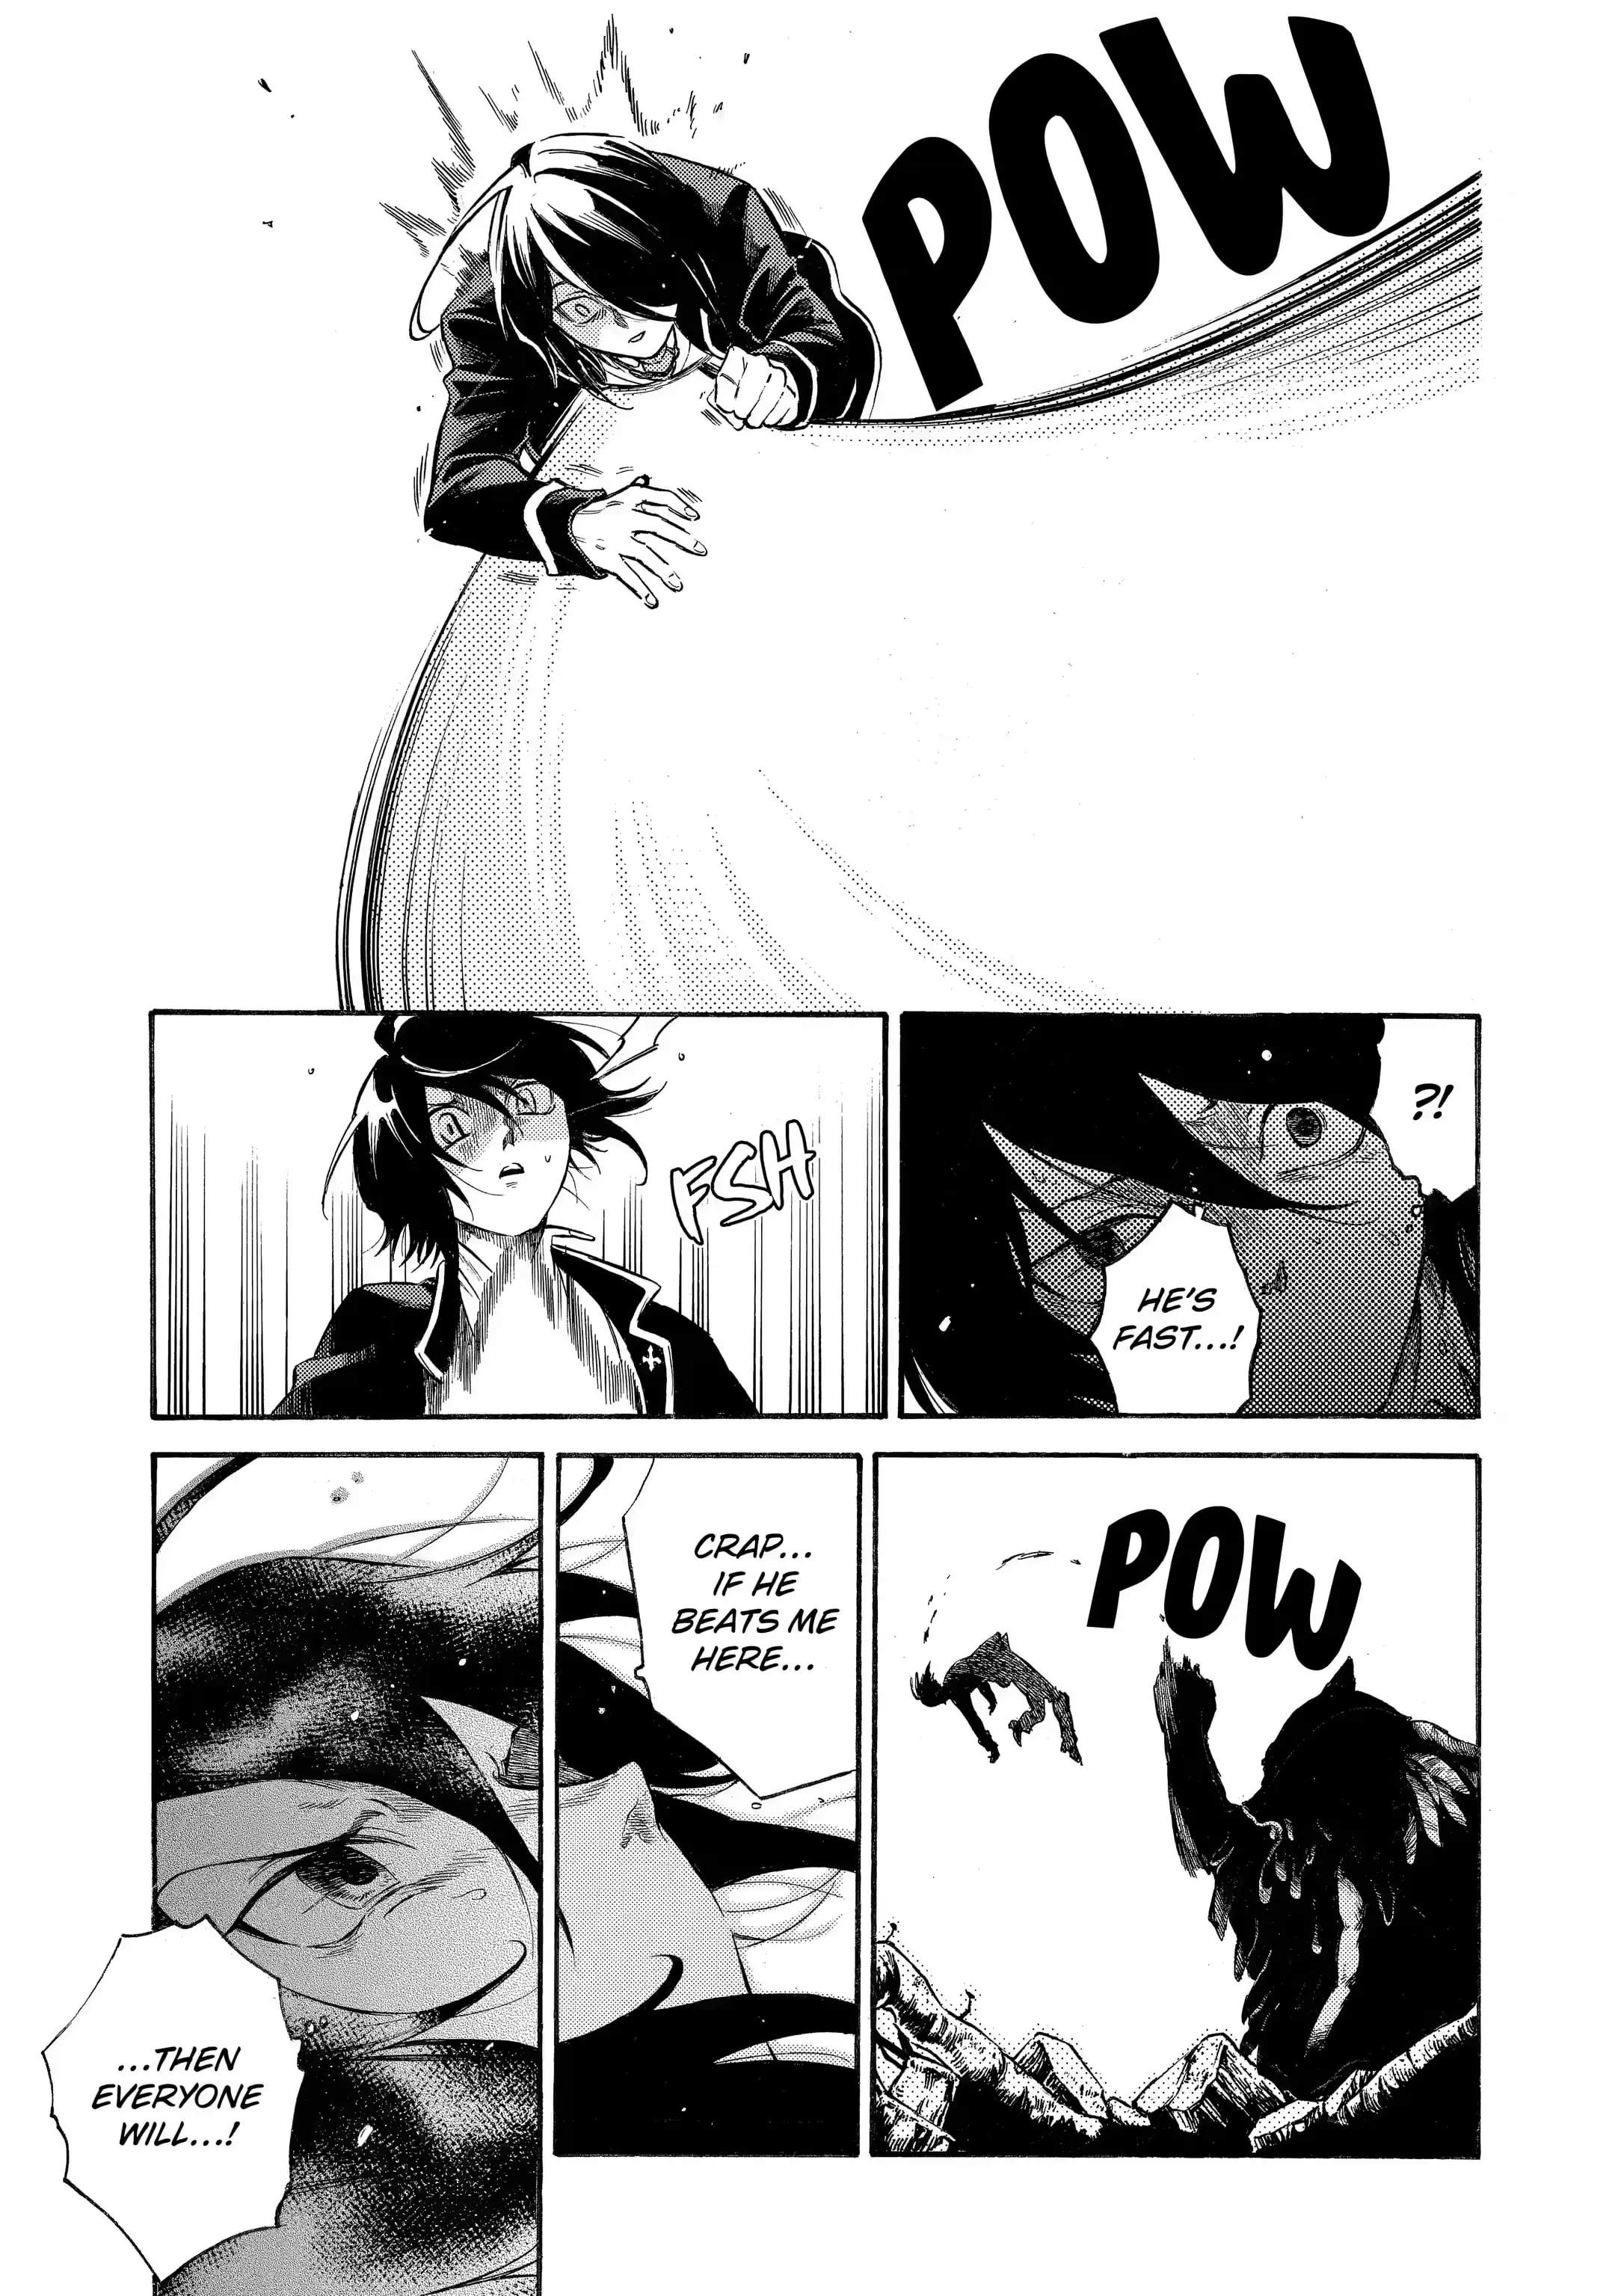 Reincarnation of the Unrivalled Time Mage: The Underachiever at the Magic Academy Turns Out to Be the Strongest Mage Who Controls Time! Chapter 10.1-eng-li - Page 11